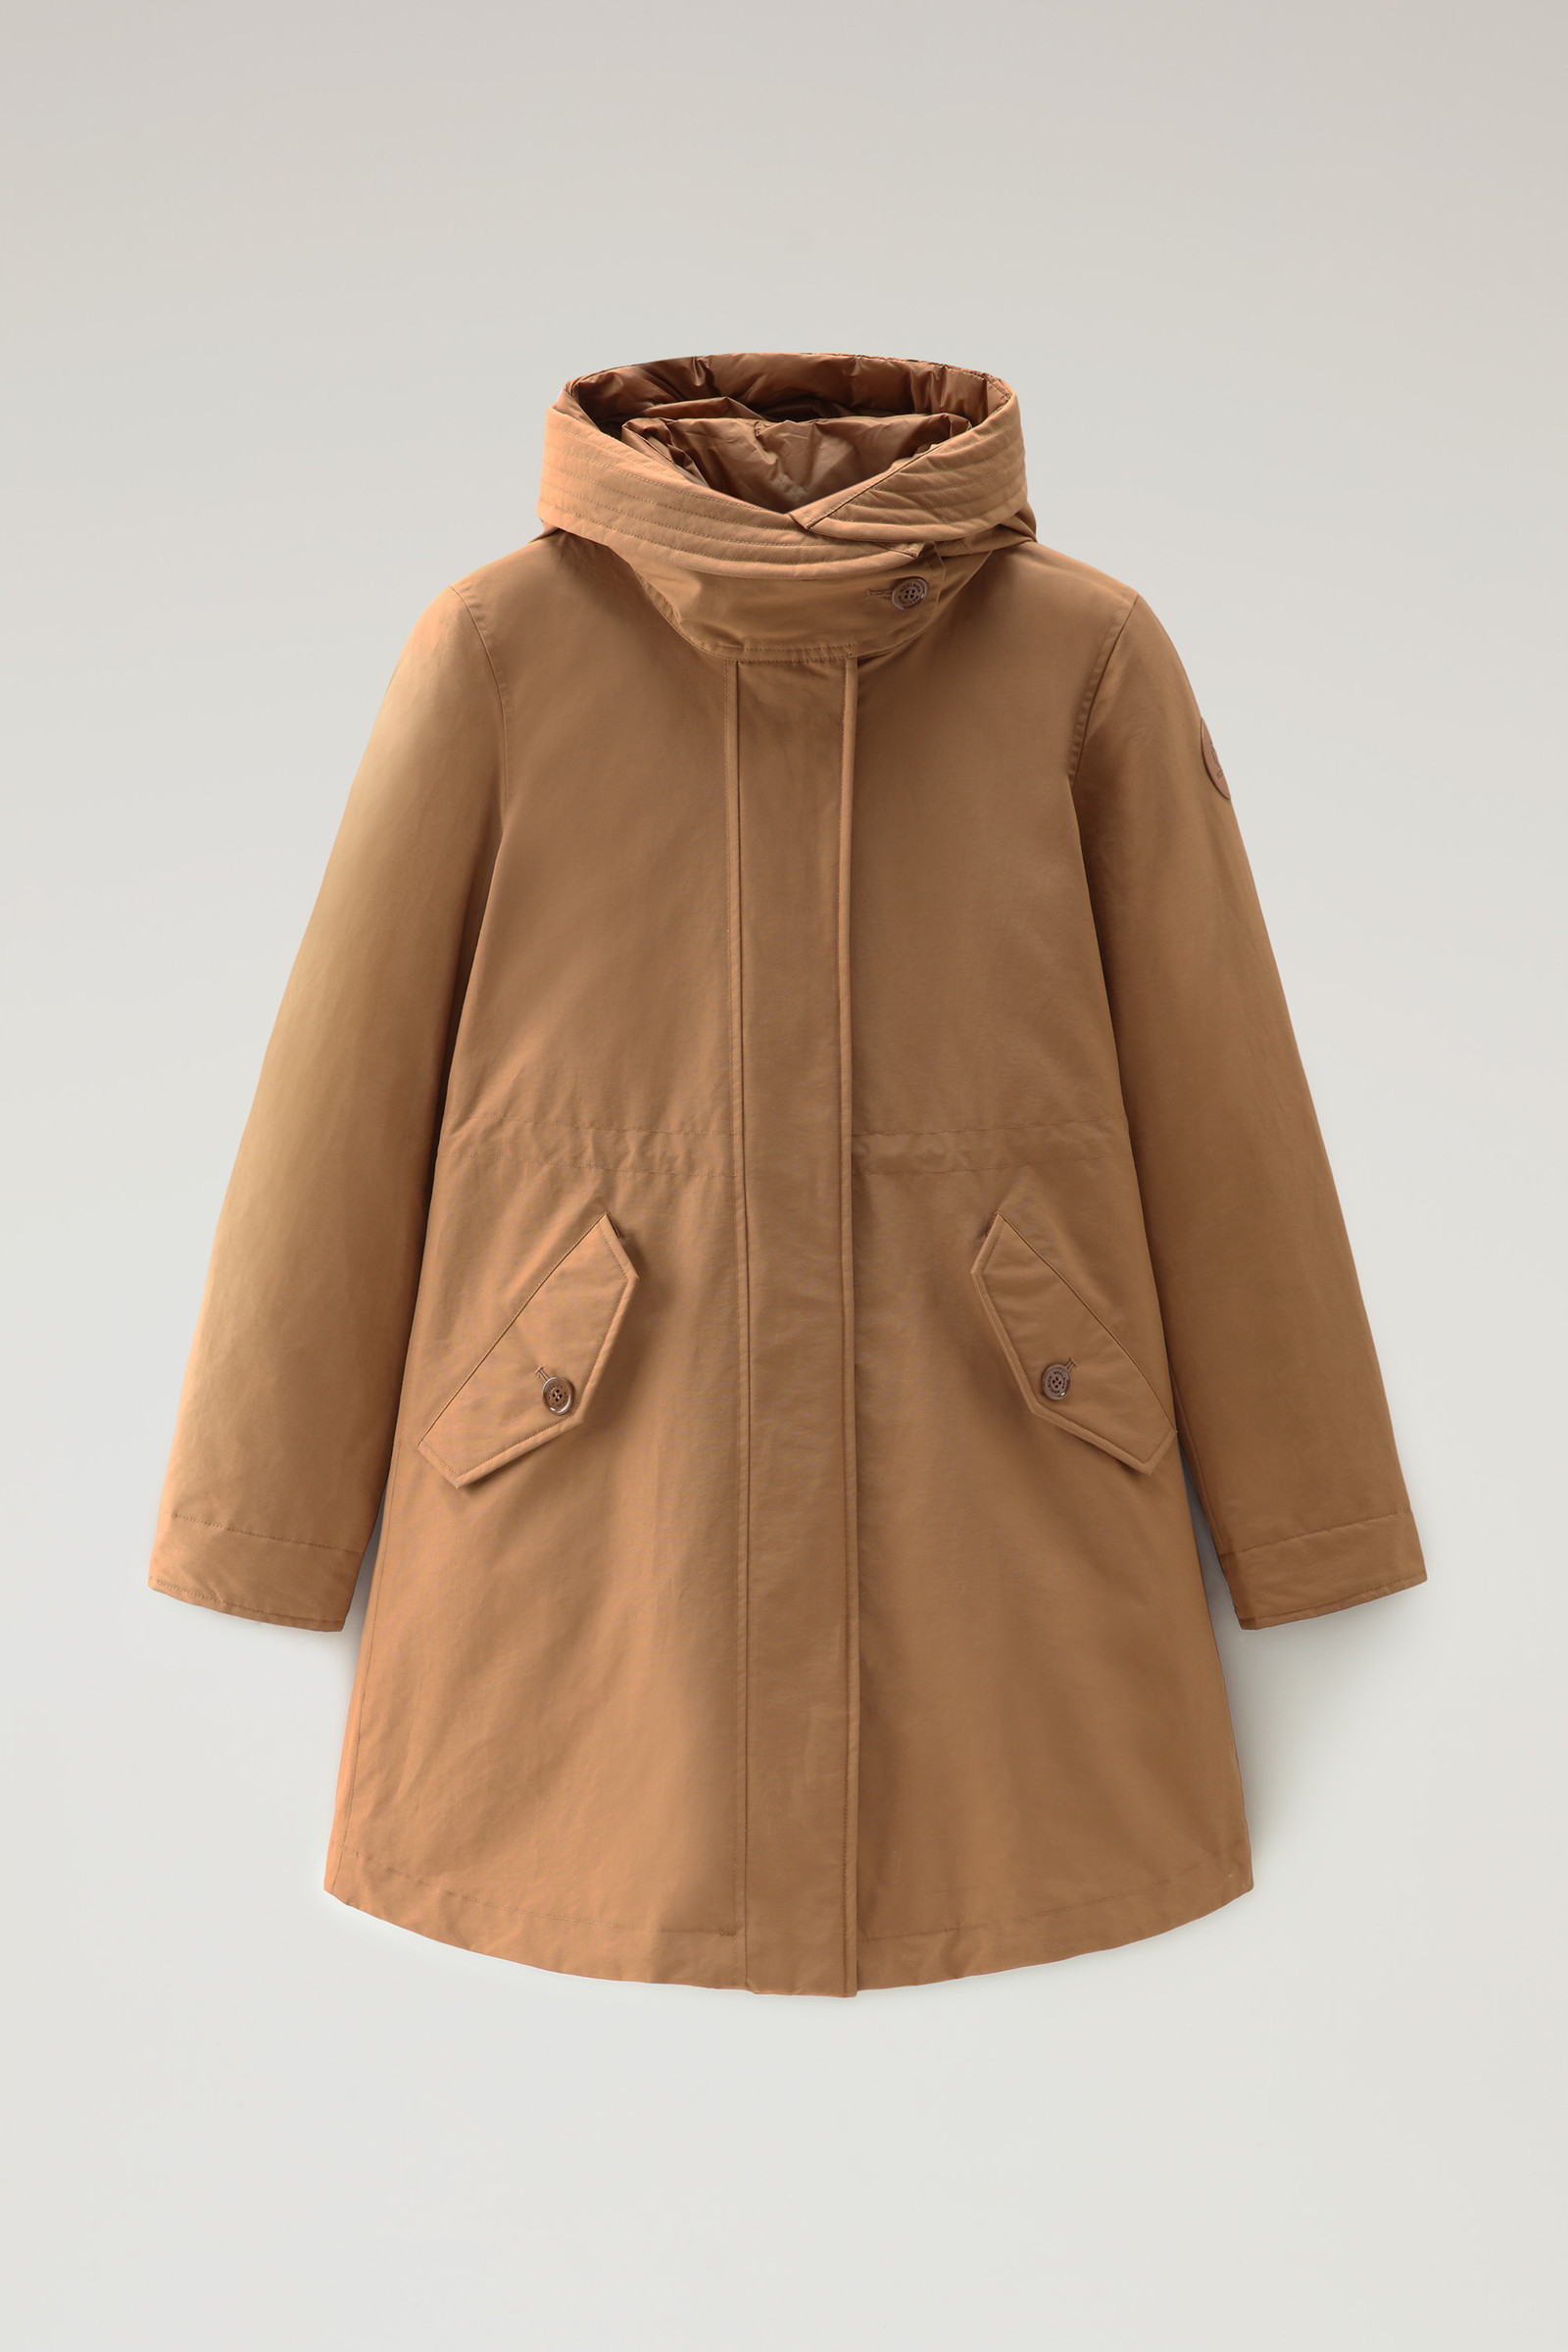 Long Military 3-in-1 Parka in Eco Ramar - Women - Brown